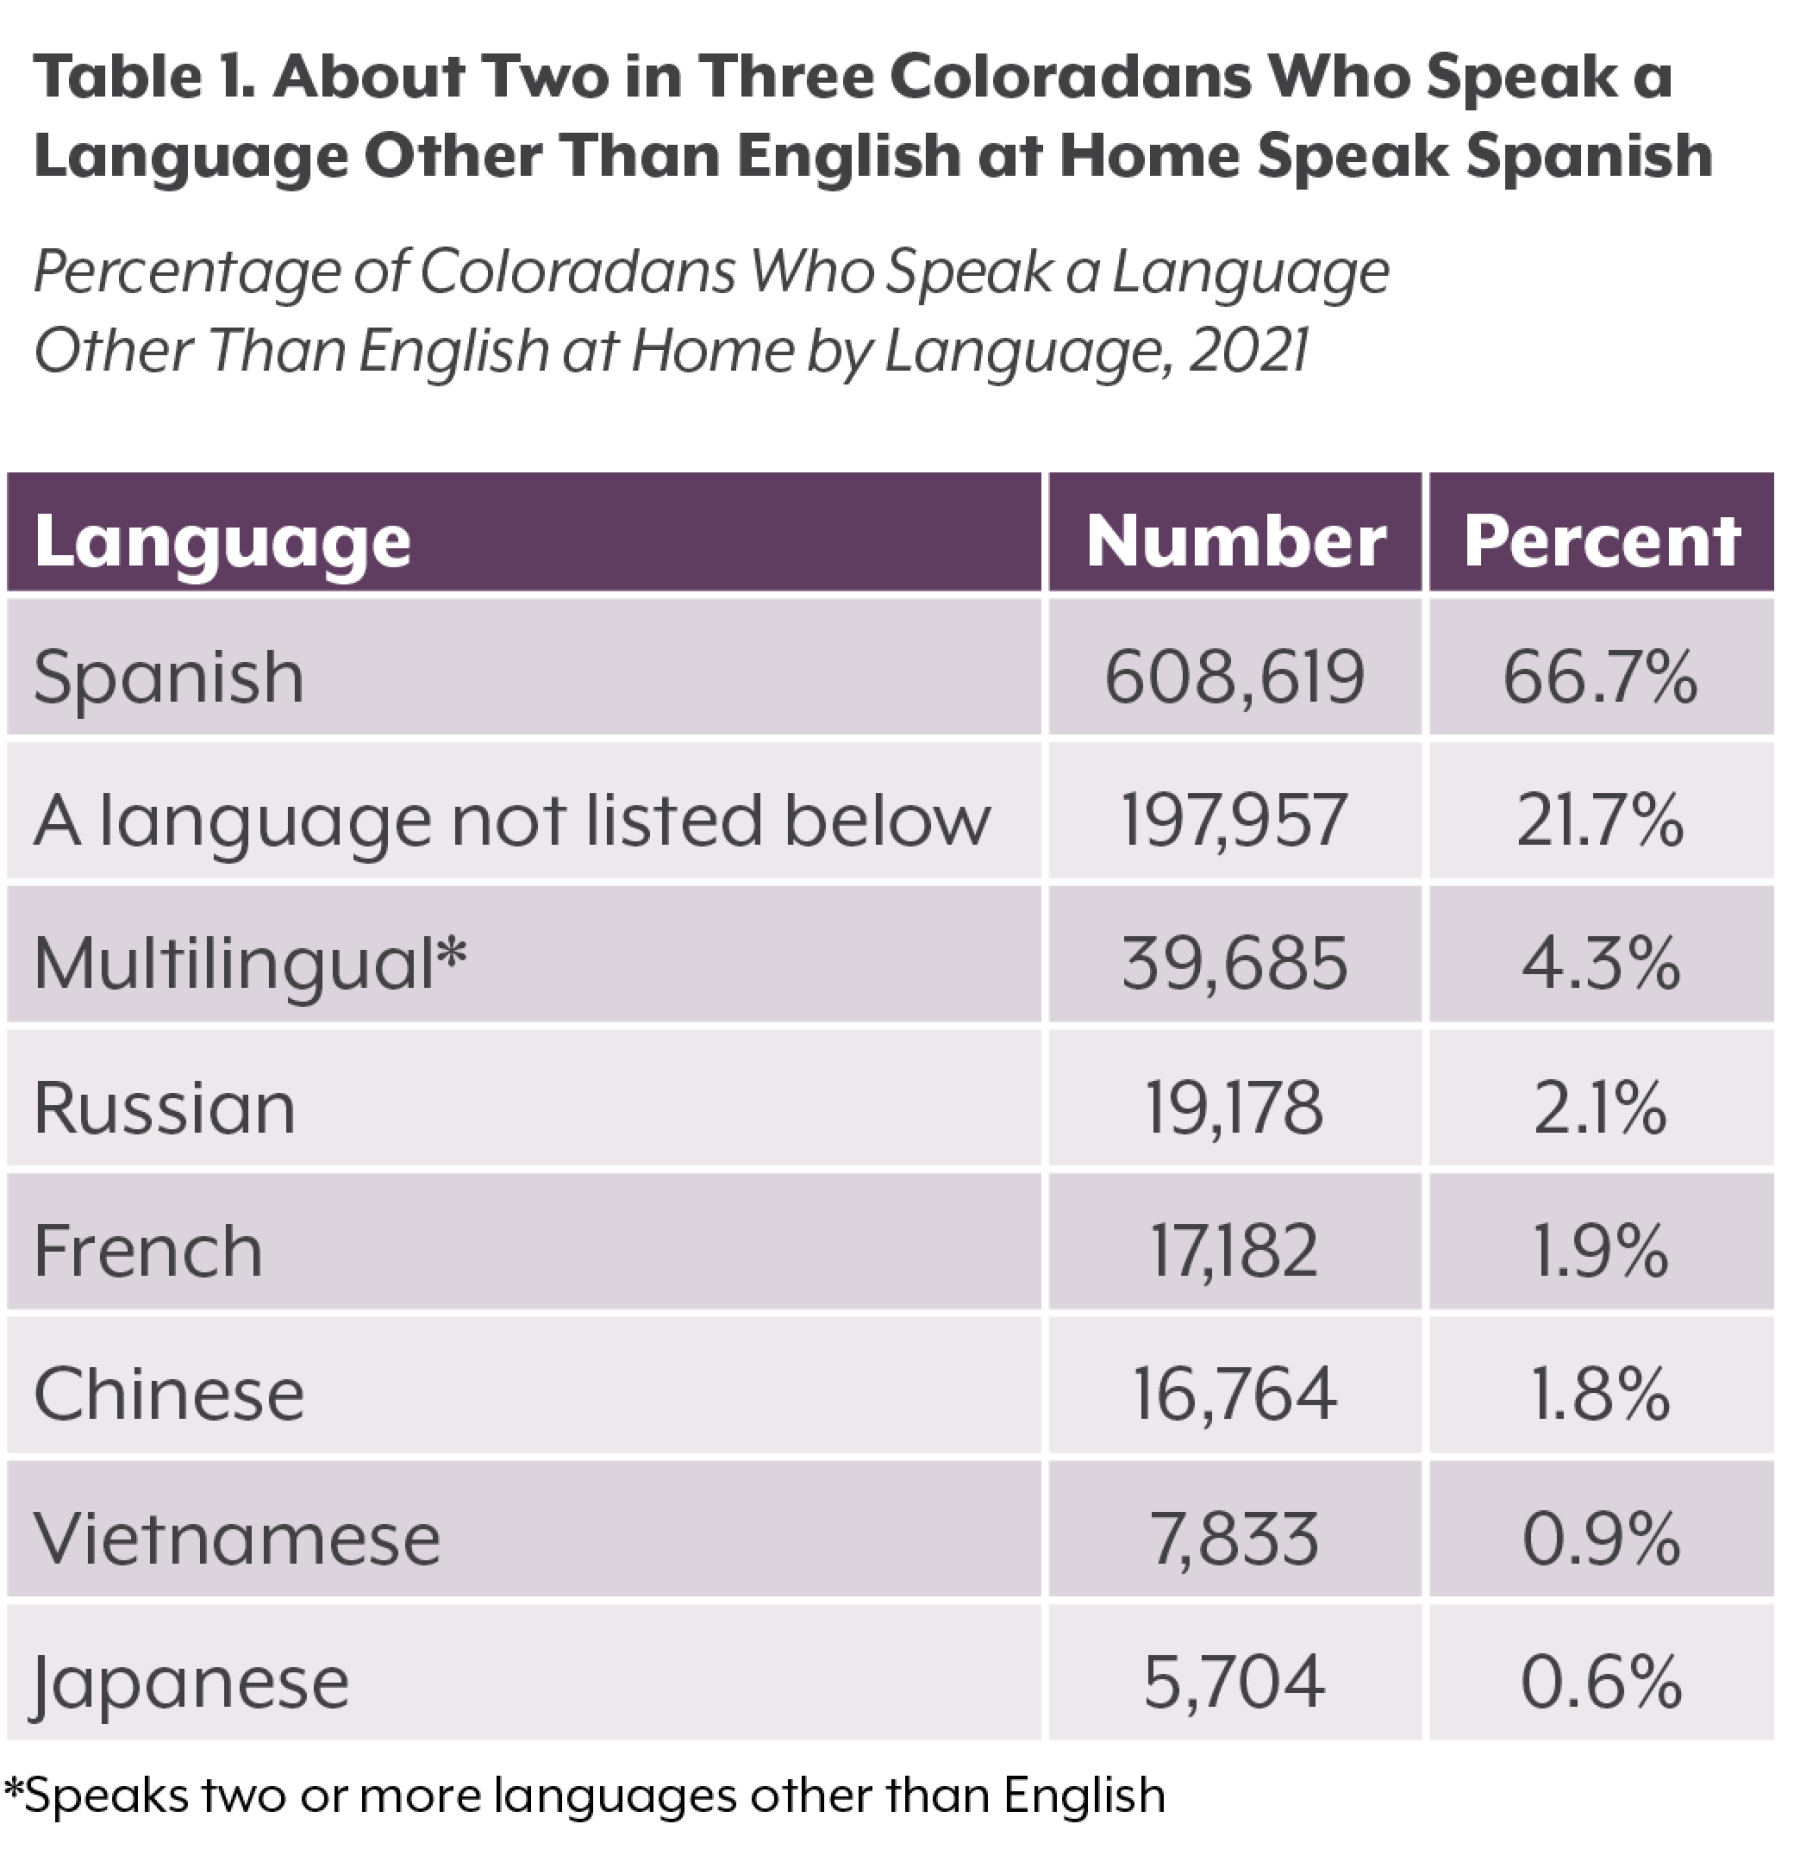 Table 1: About Two in Three Coloradans Who Speak a Language Other Than English at Home Speak Spanish